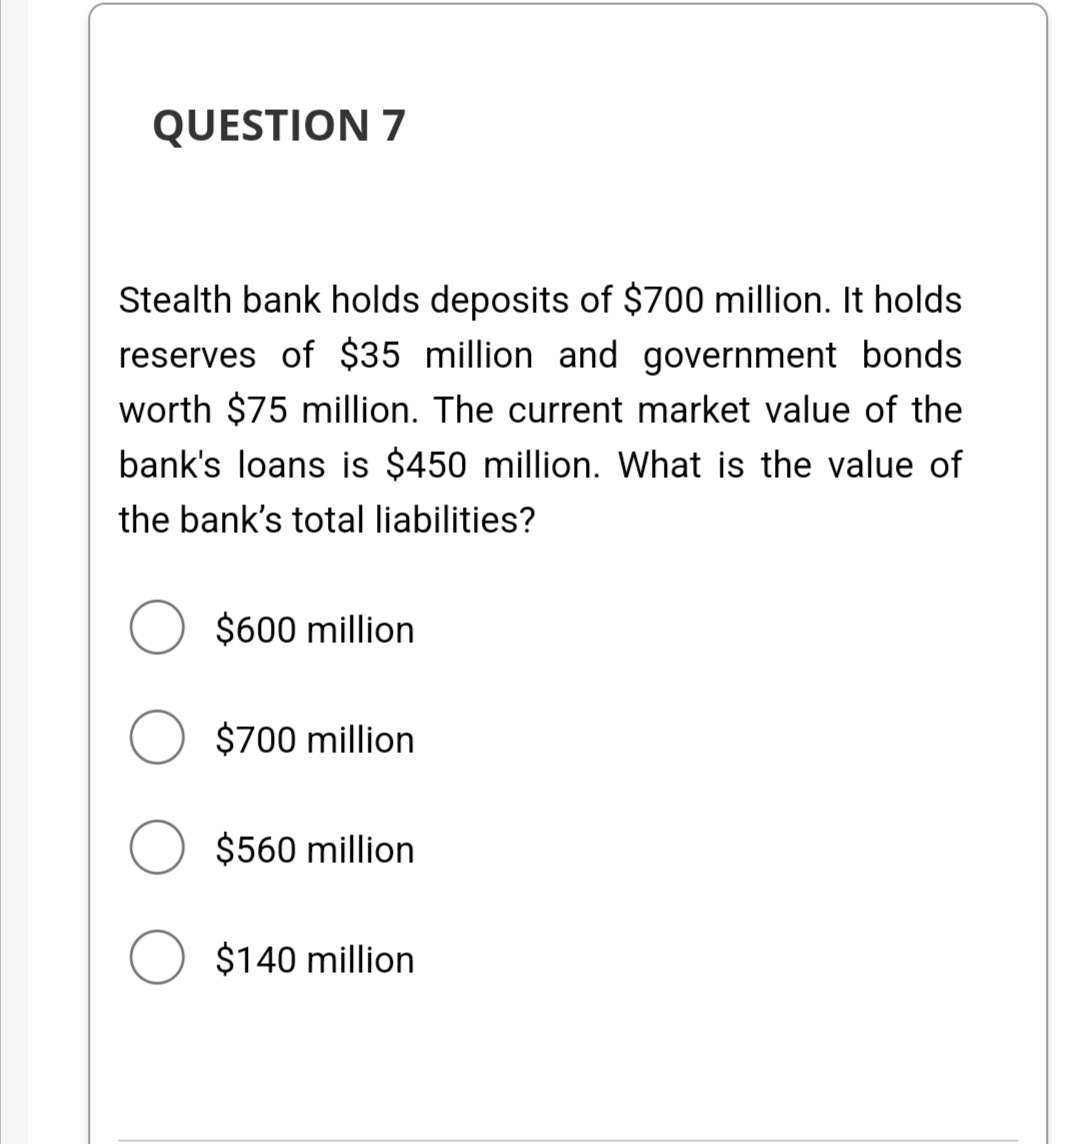 QUESTION 7
Stealth bank holds deposits of $700 million. It holds
reserves of $35 million and government bonds
worth $75 million. The current market value of the
bank's loans is $450 million. What is the value of
the bank's total liabilities?
$600 million
O $700 million
O $560 million
O $140 million